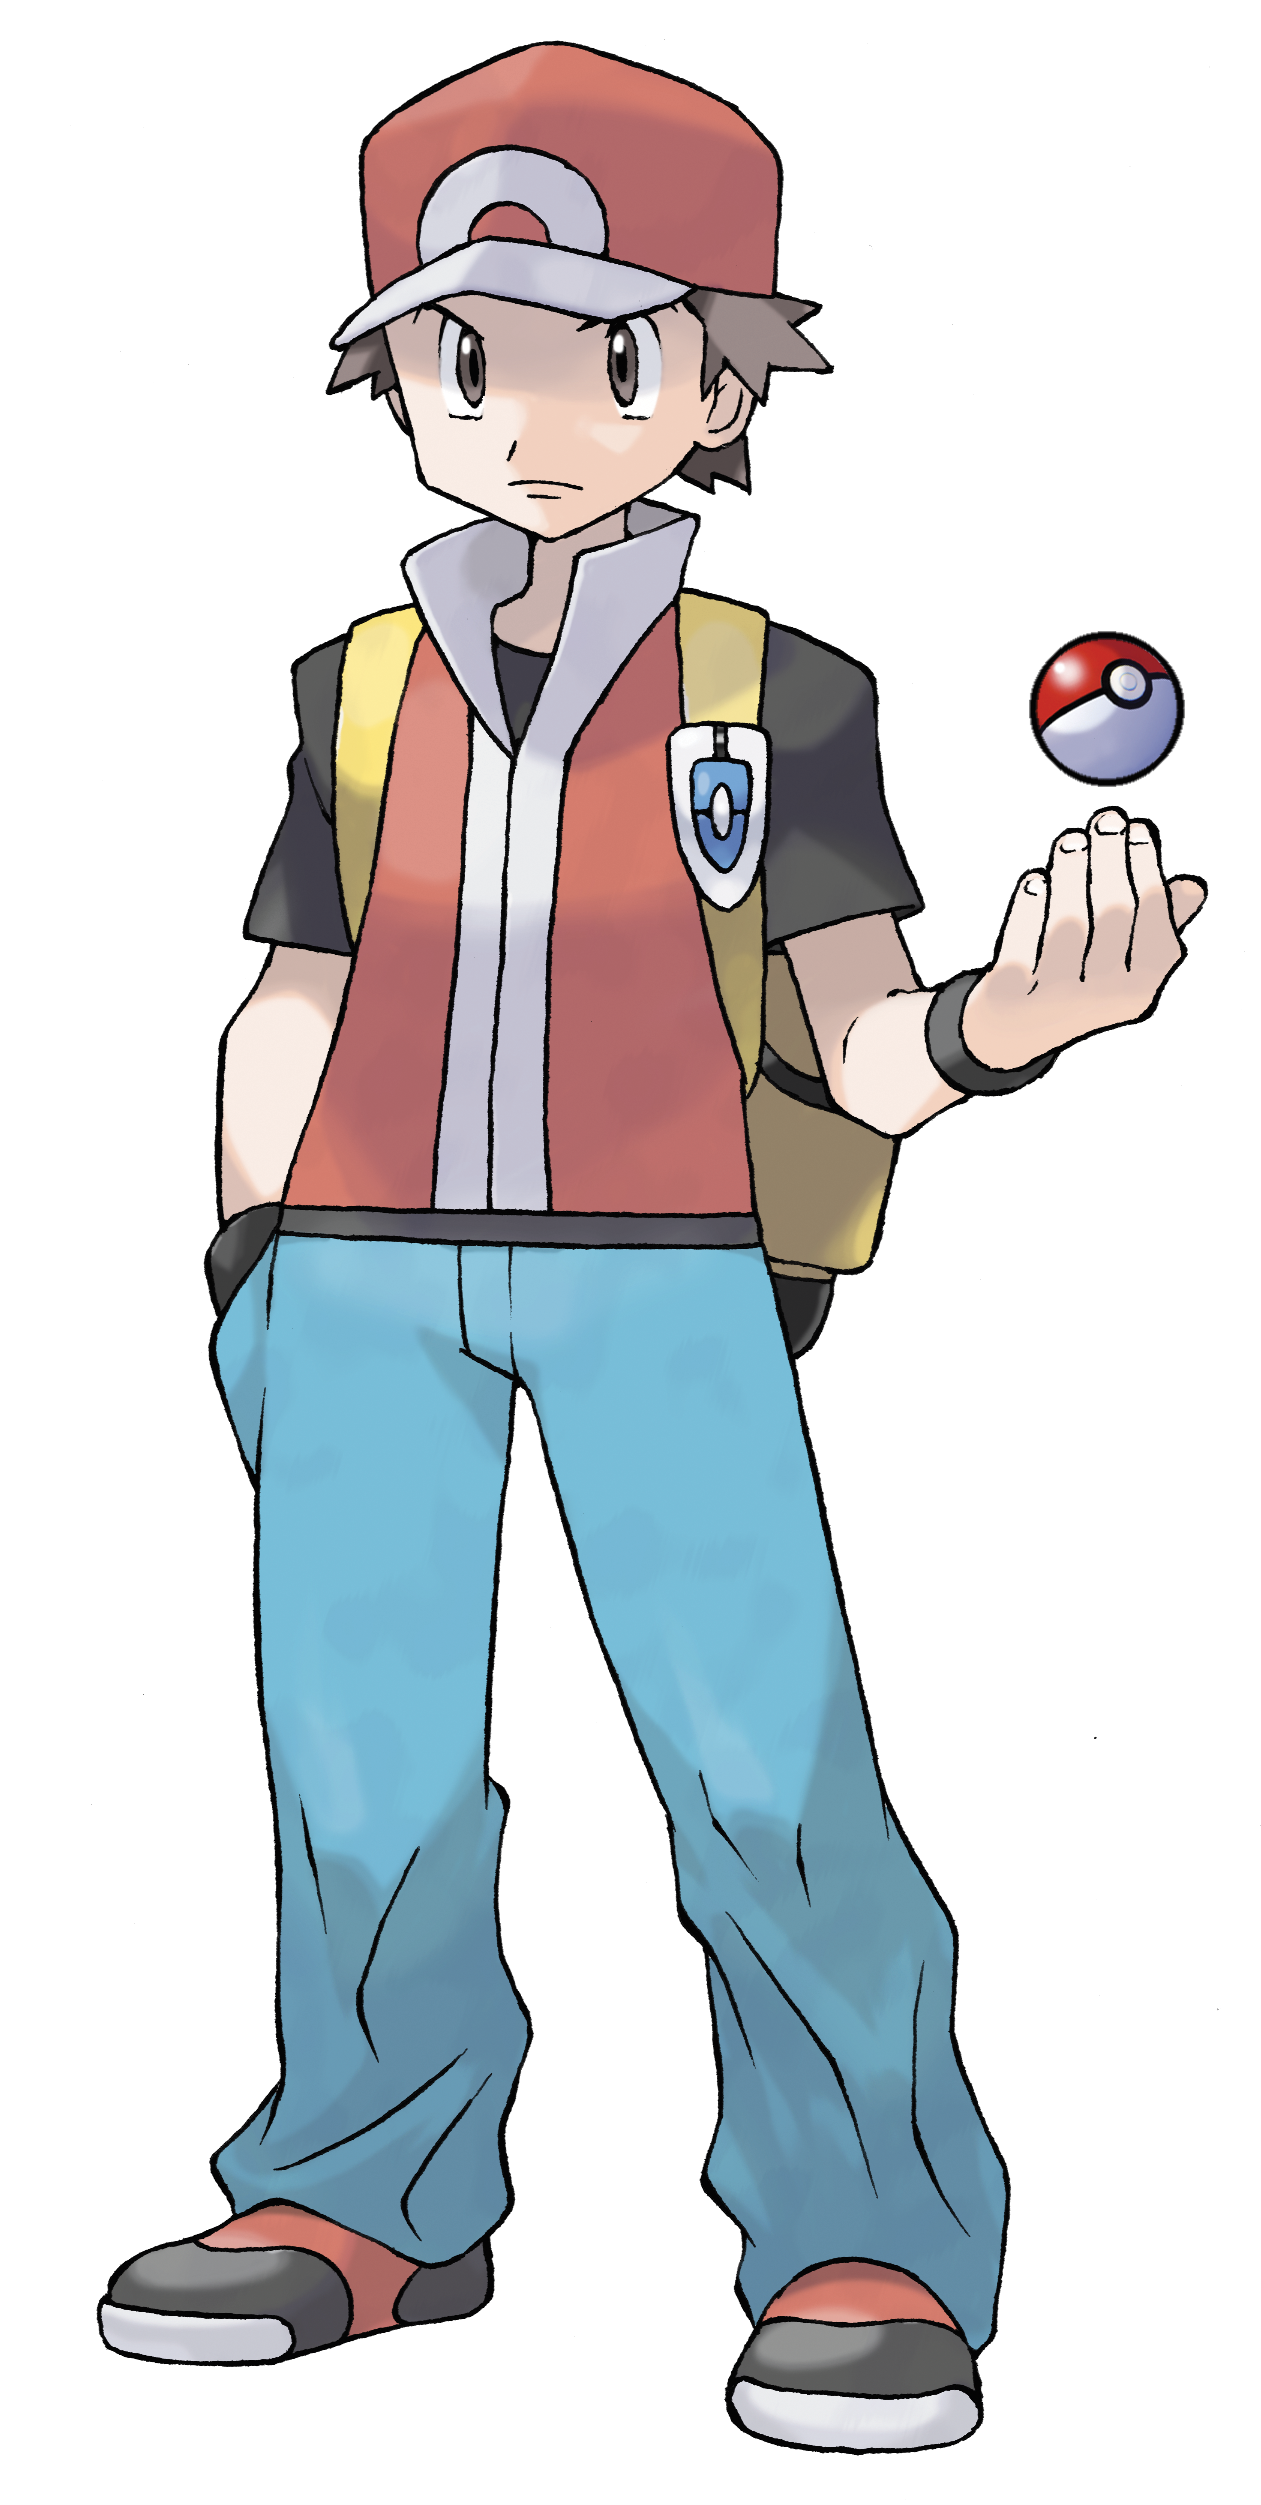 Pokémon Red and Green Versions - Bulbapedia, the community-driven